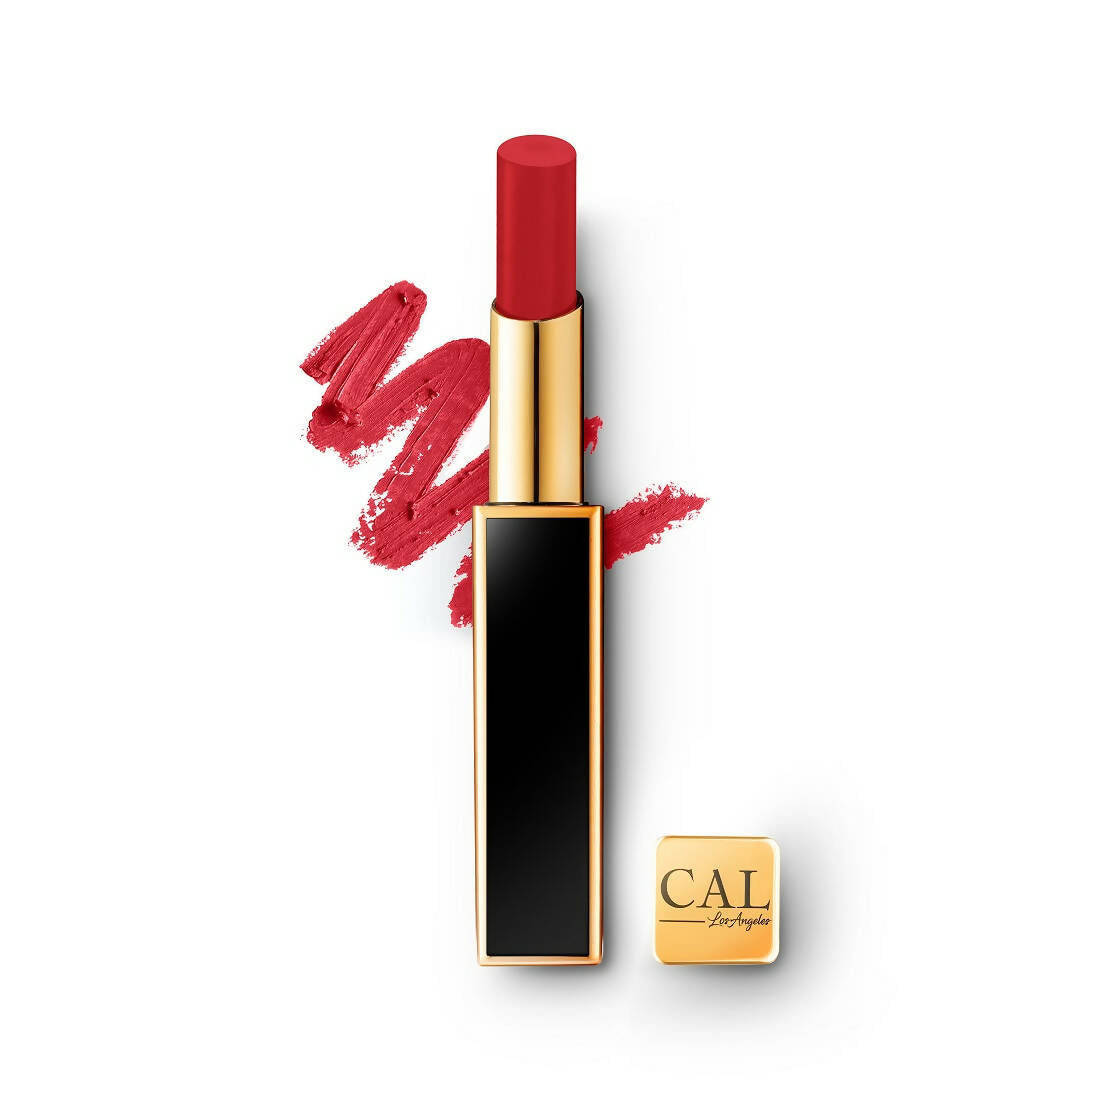 CAL Los Angeles Iconic Collection Lipstick - Oxford Red - BUDNE